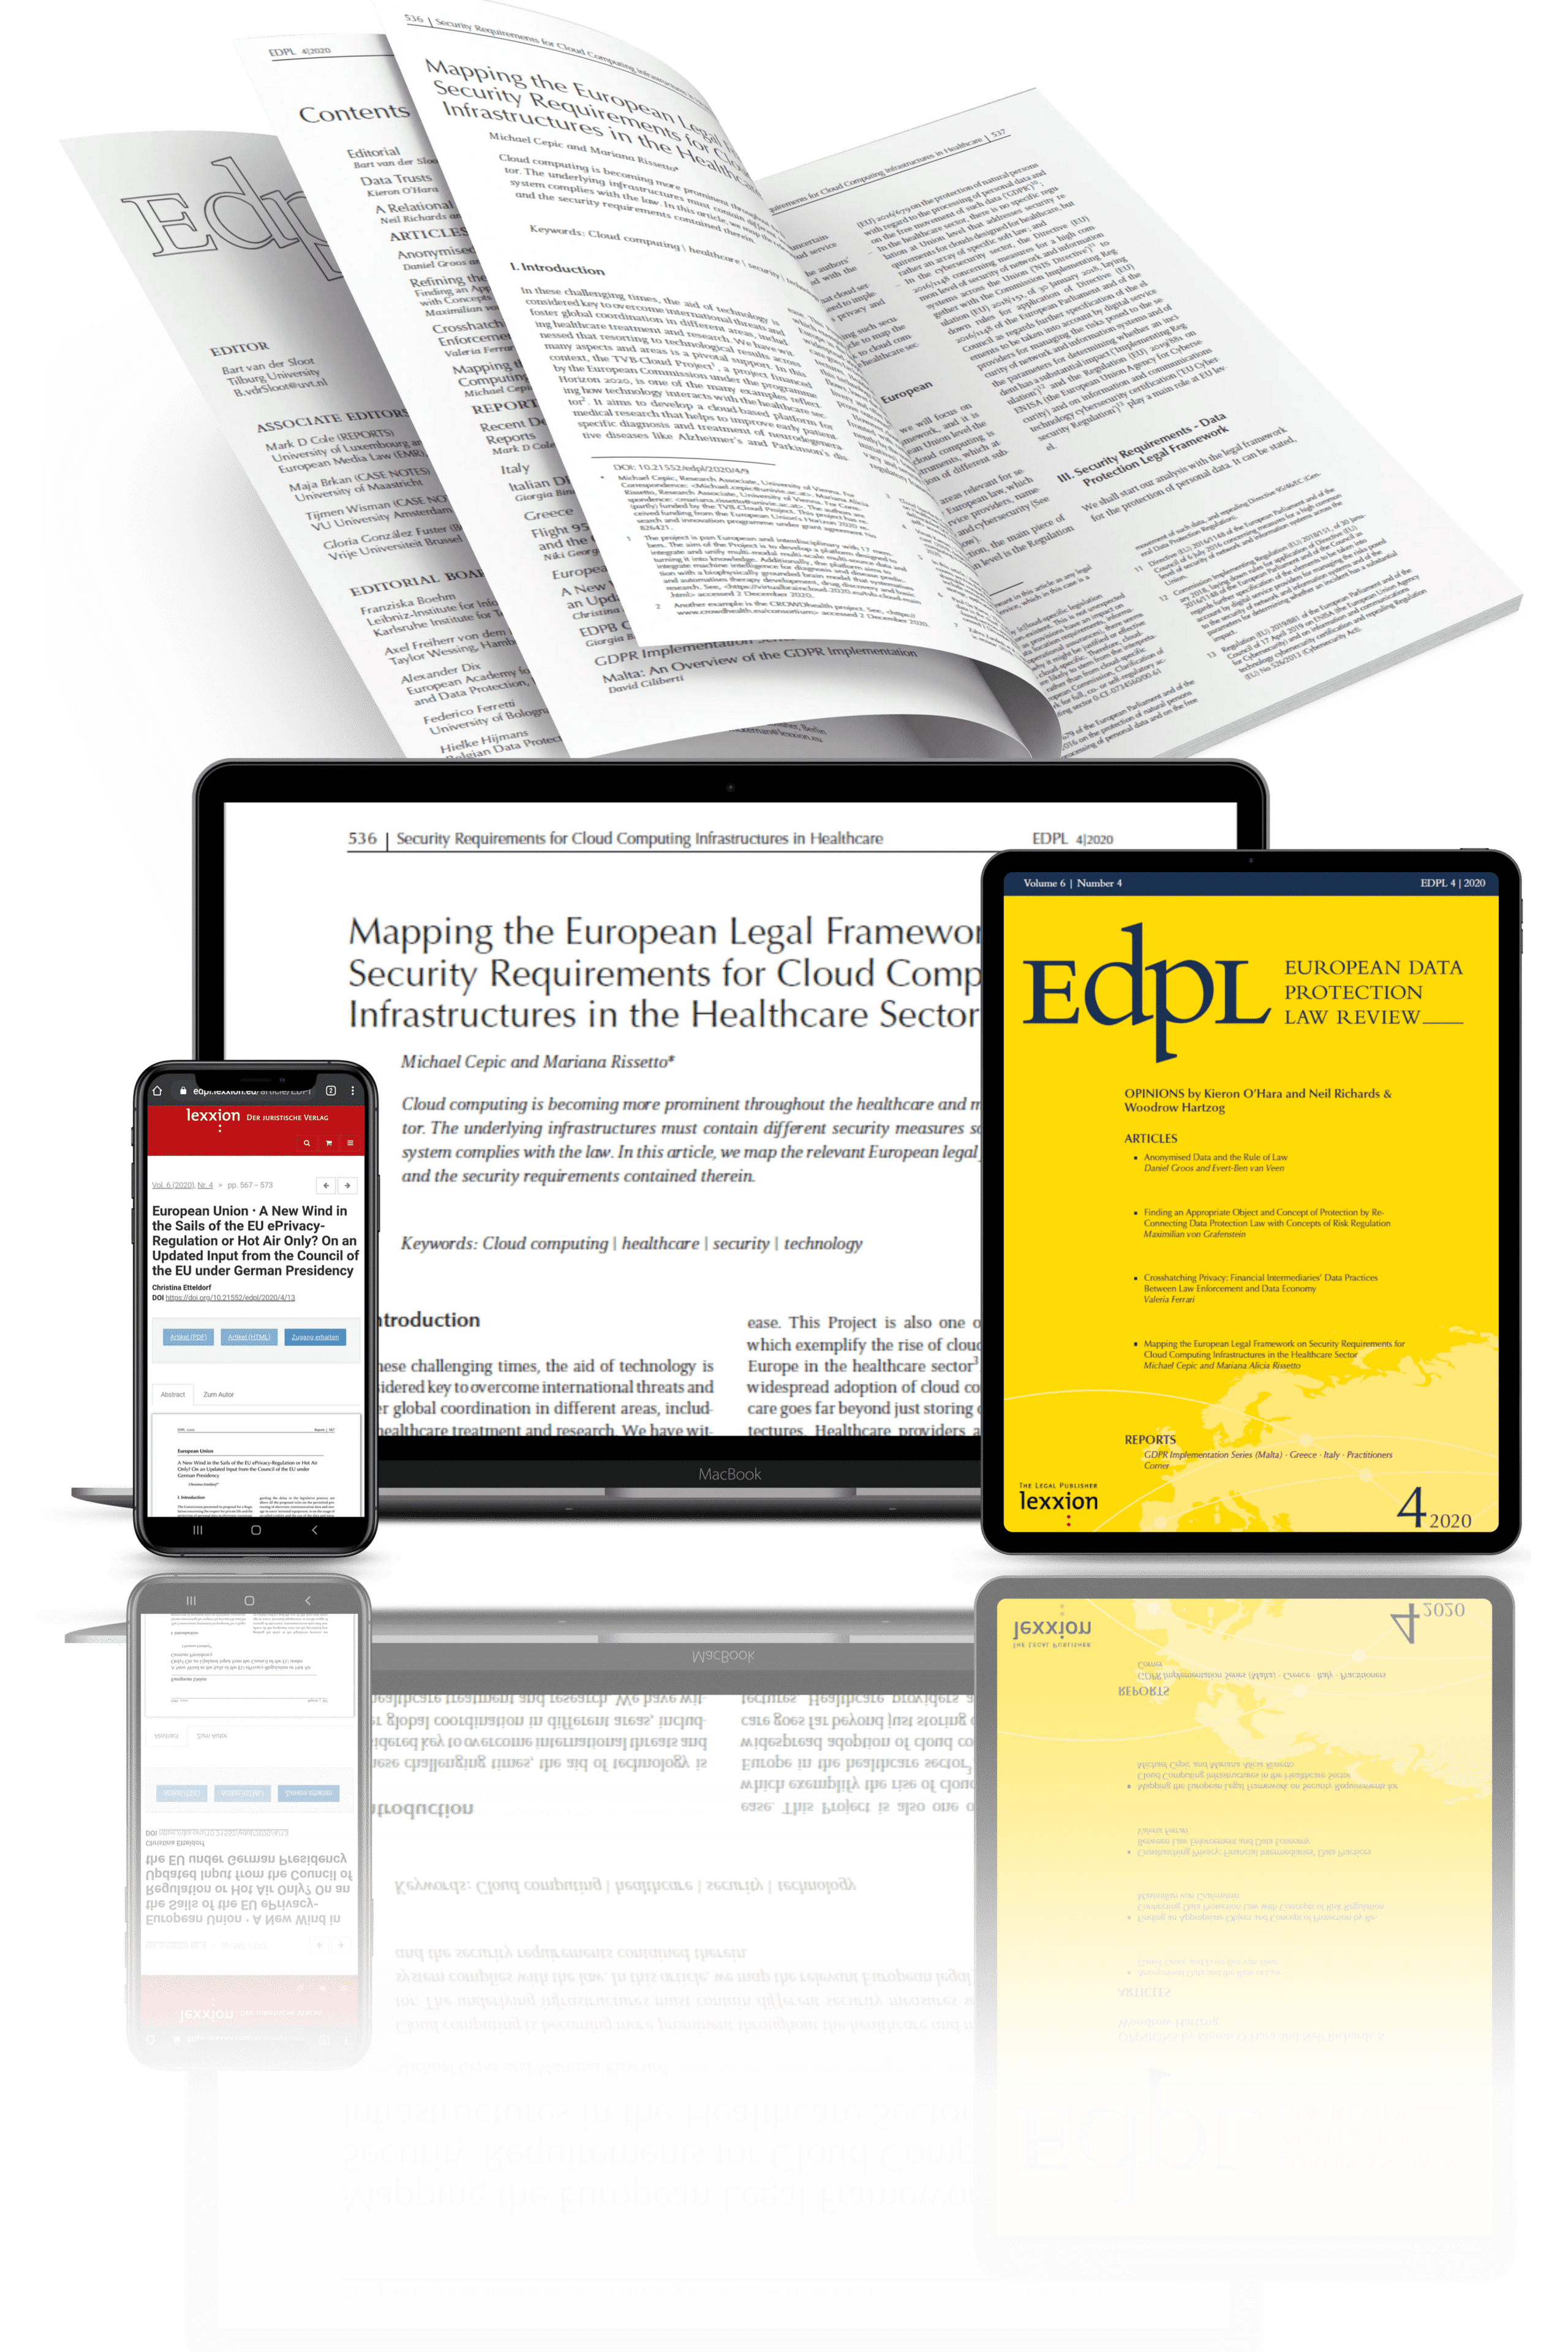 EDPL – European Data Protection Law Review - Coverwebsite EDPL min